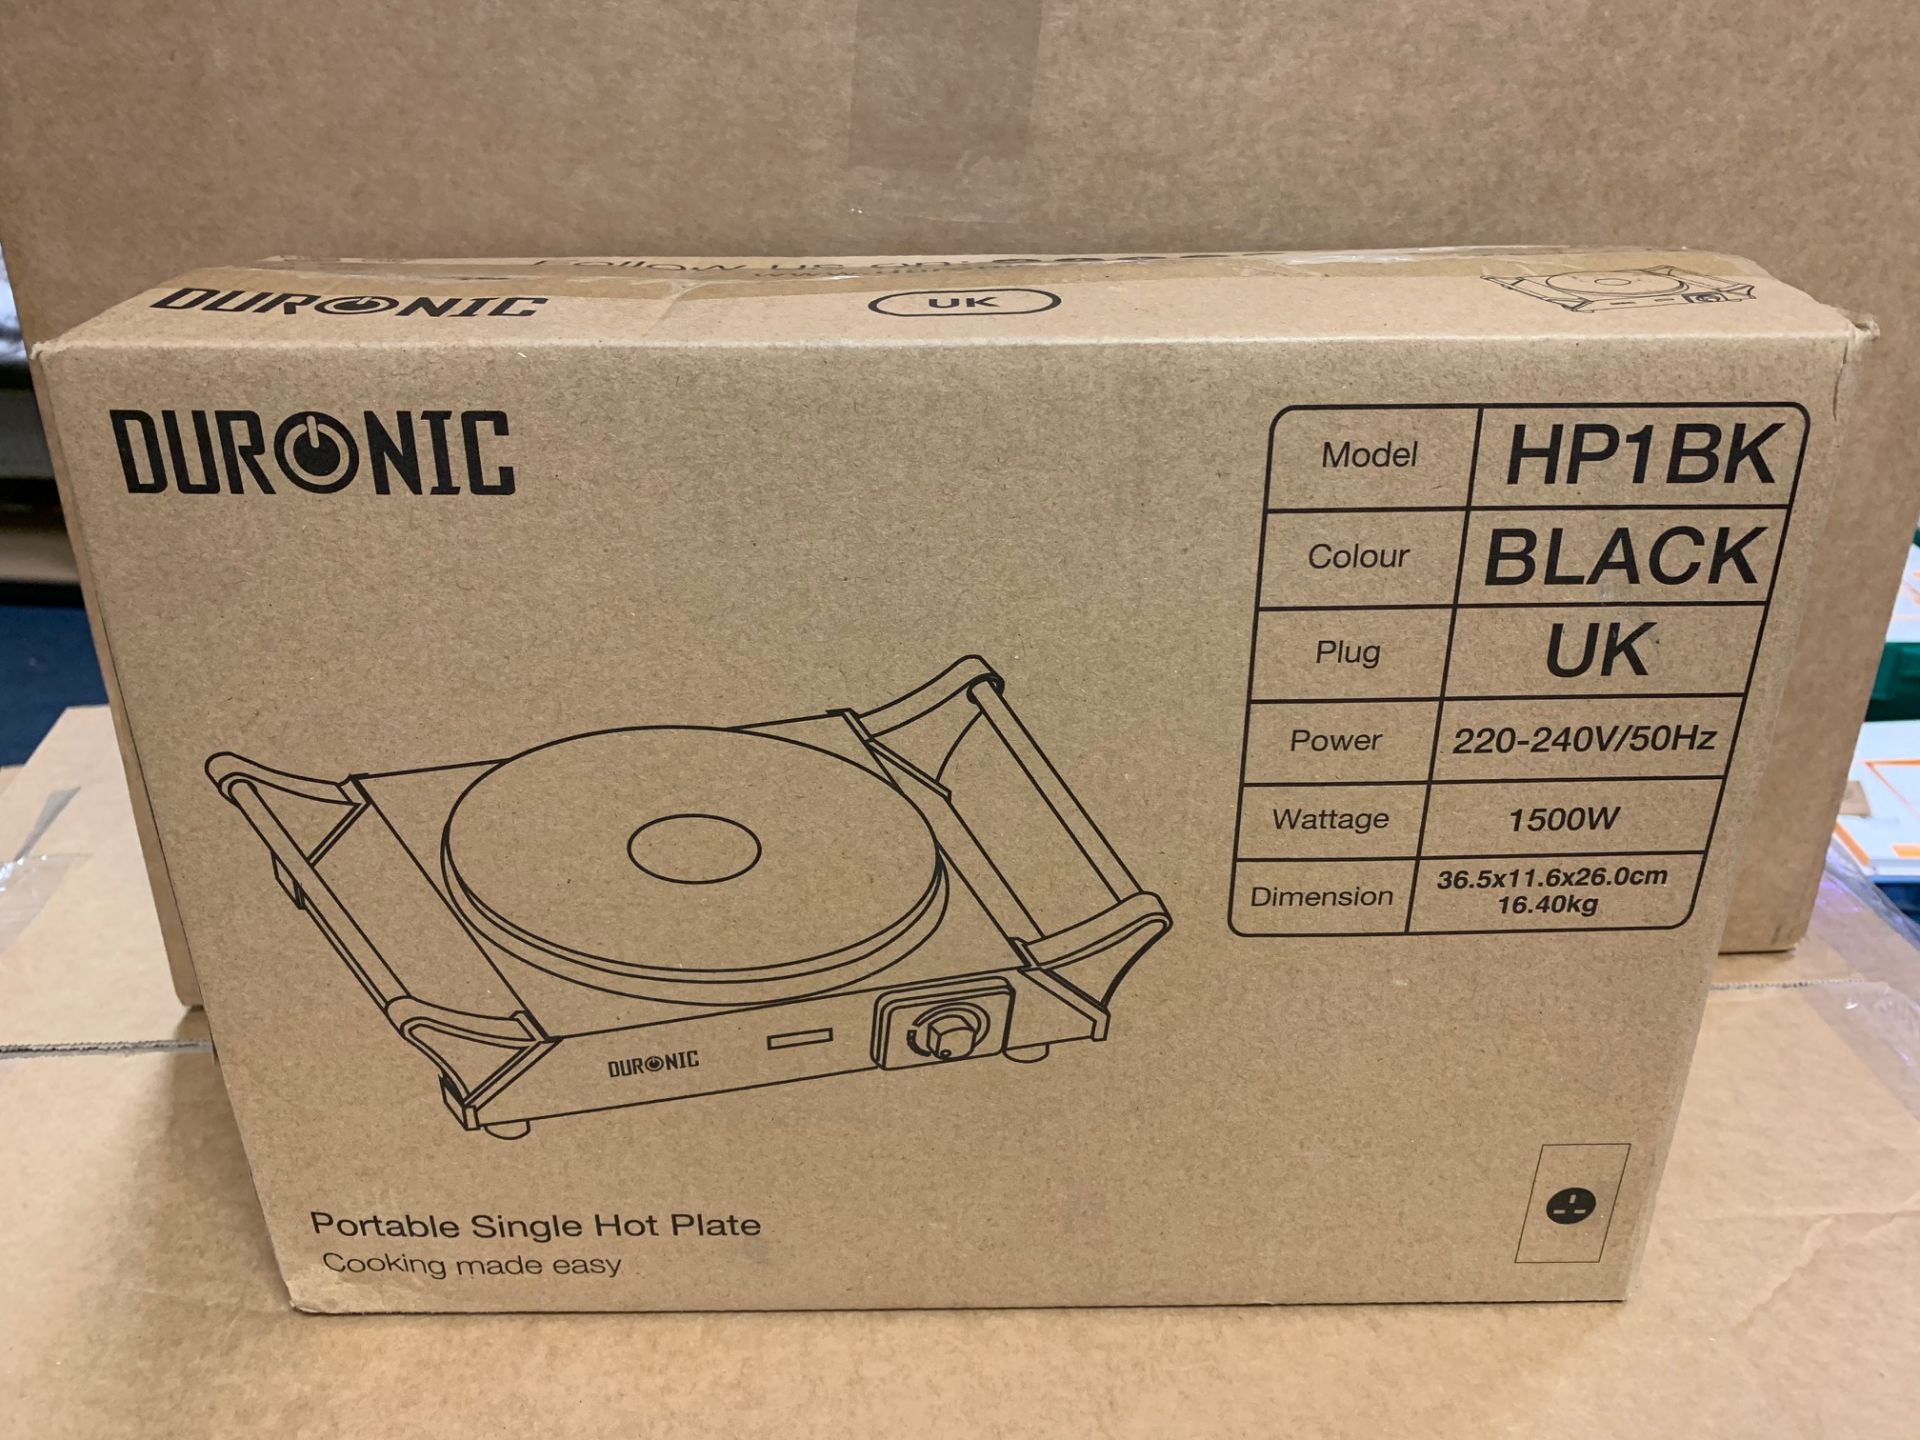 1 X NEW & BOXED DURONIC PORTABLE SINGLE HOT PLATE